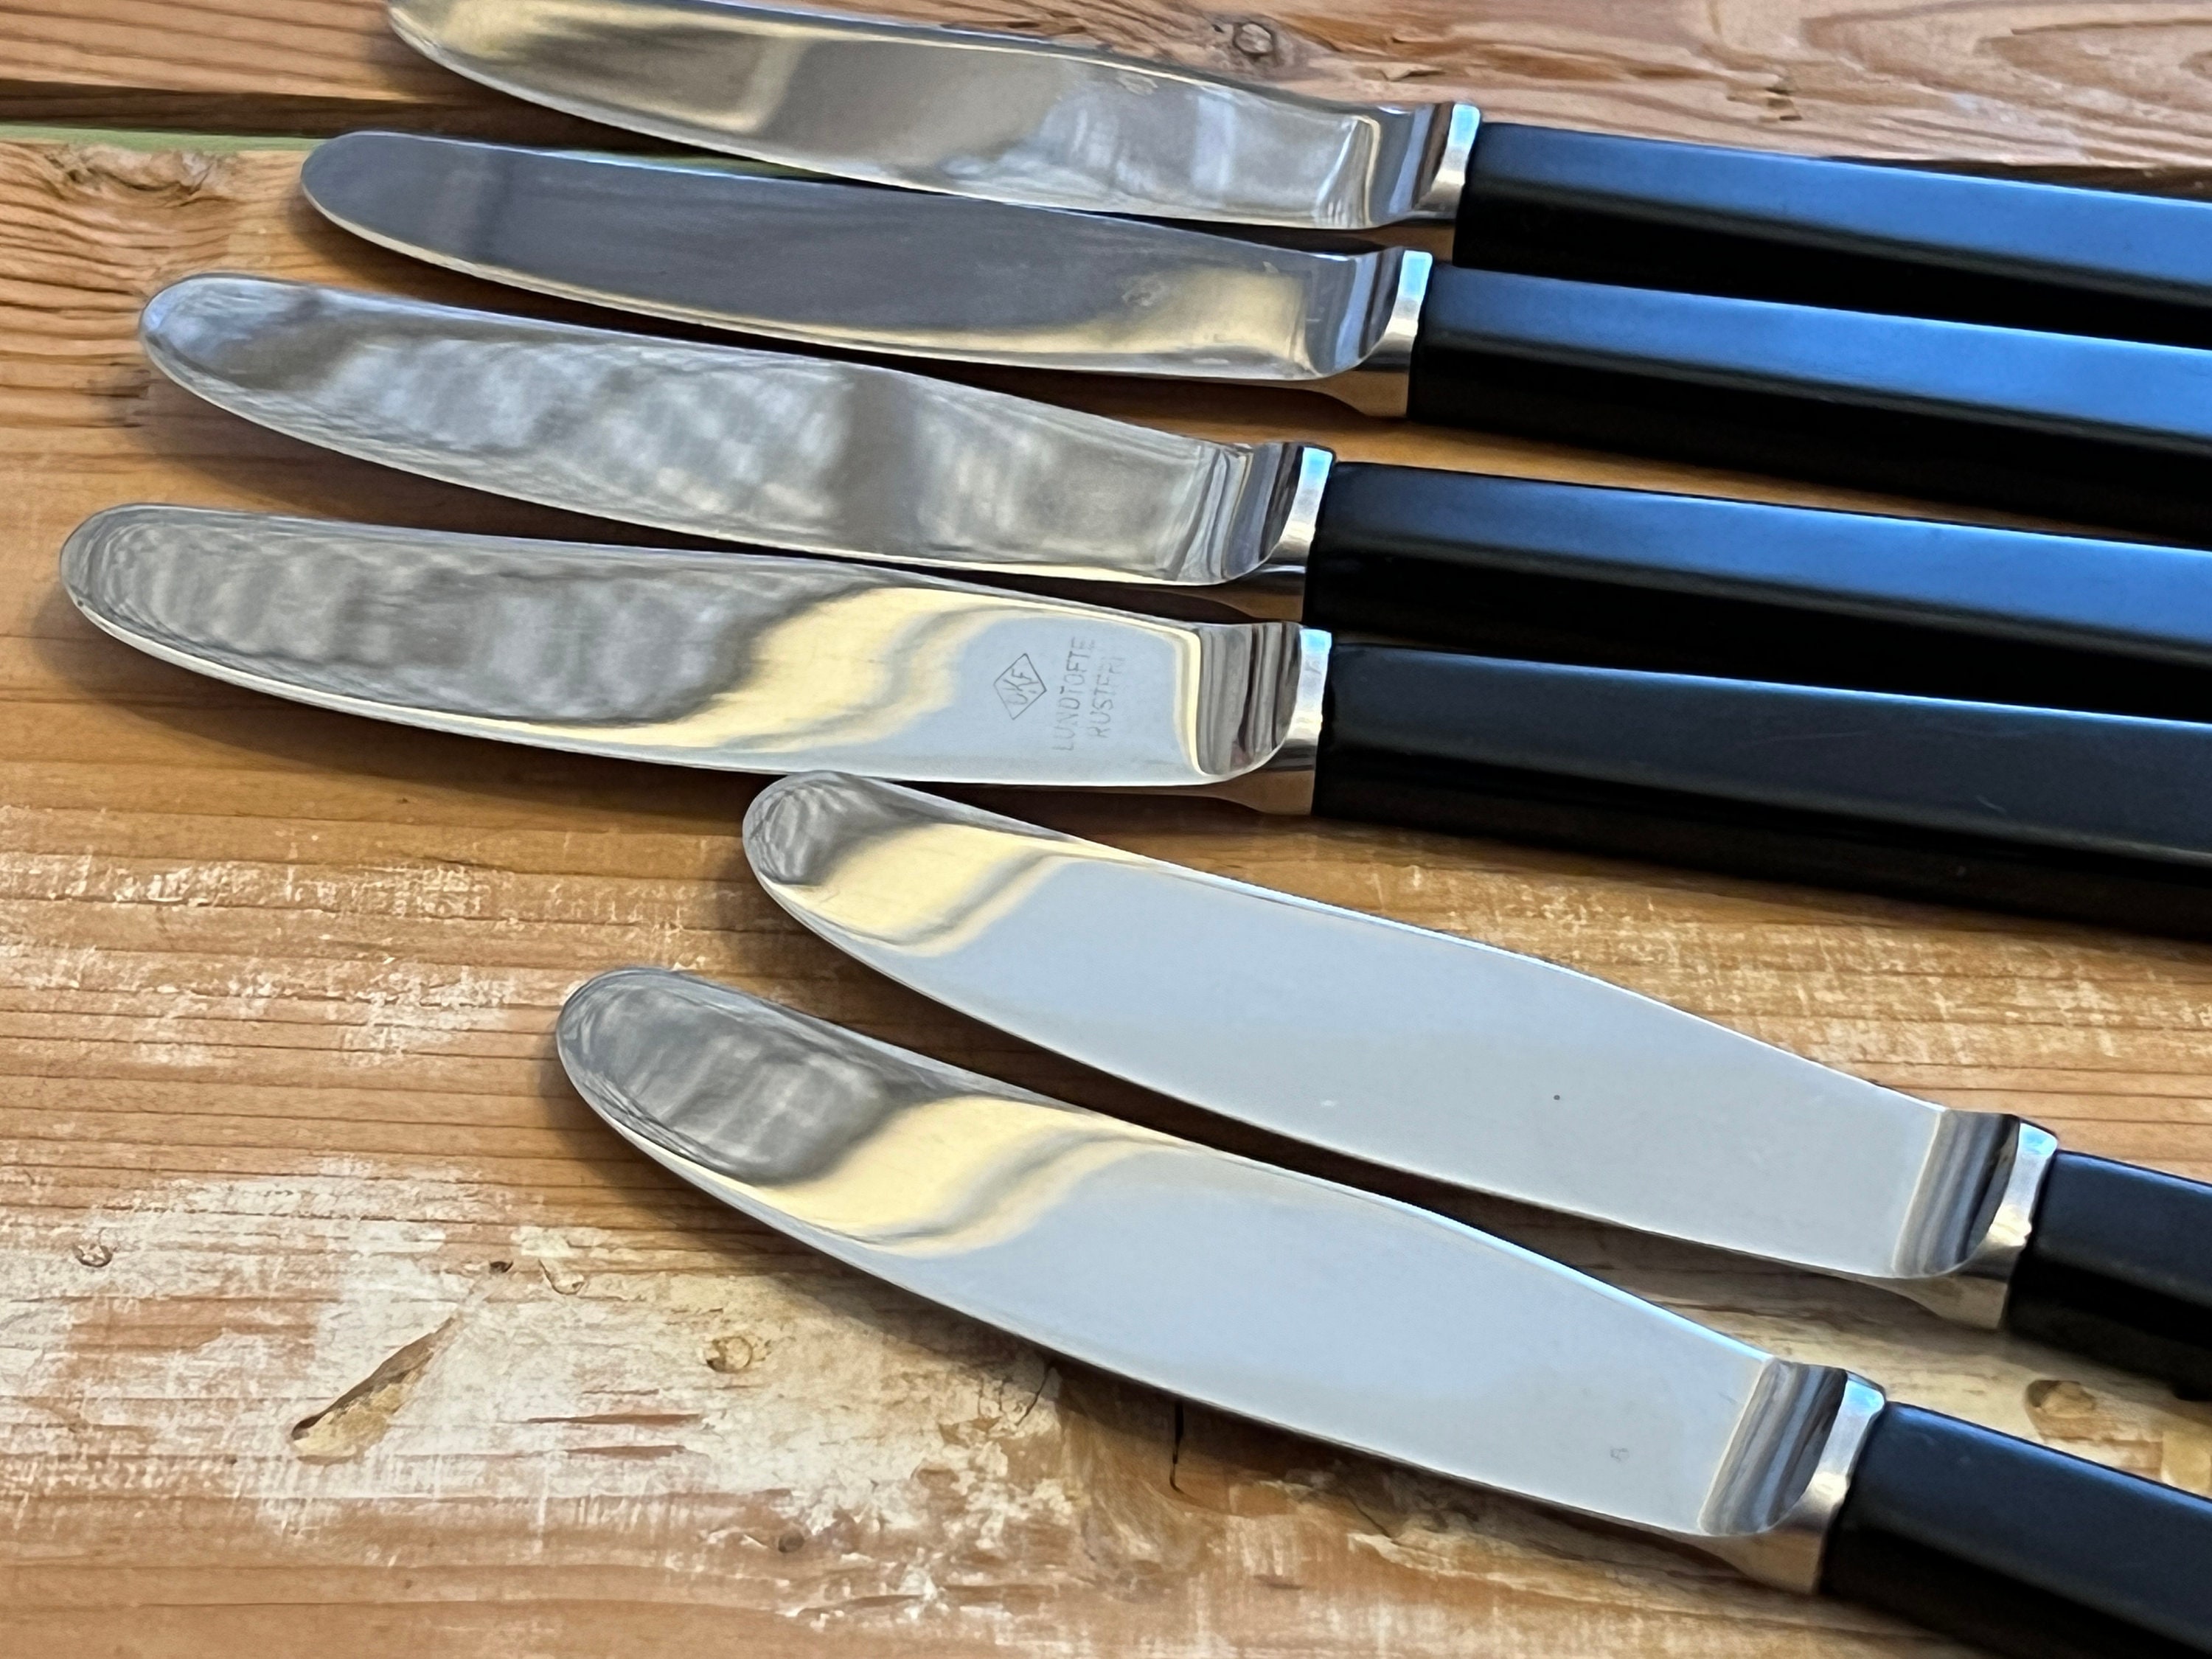 Lundtofte 6 Piece Dinner With Black Handles - Etsy